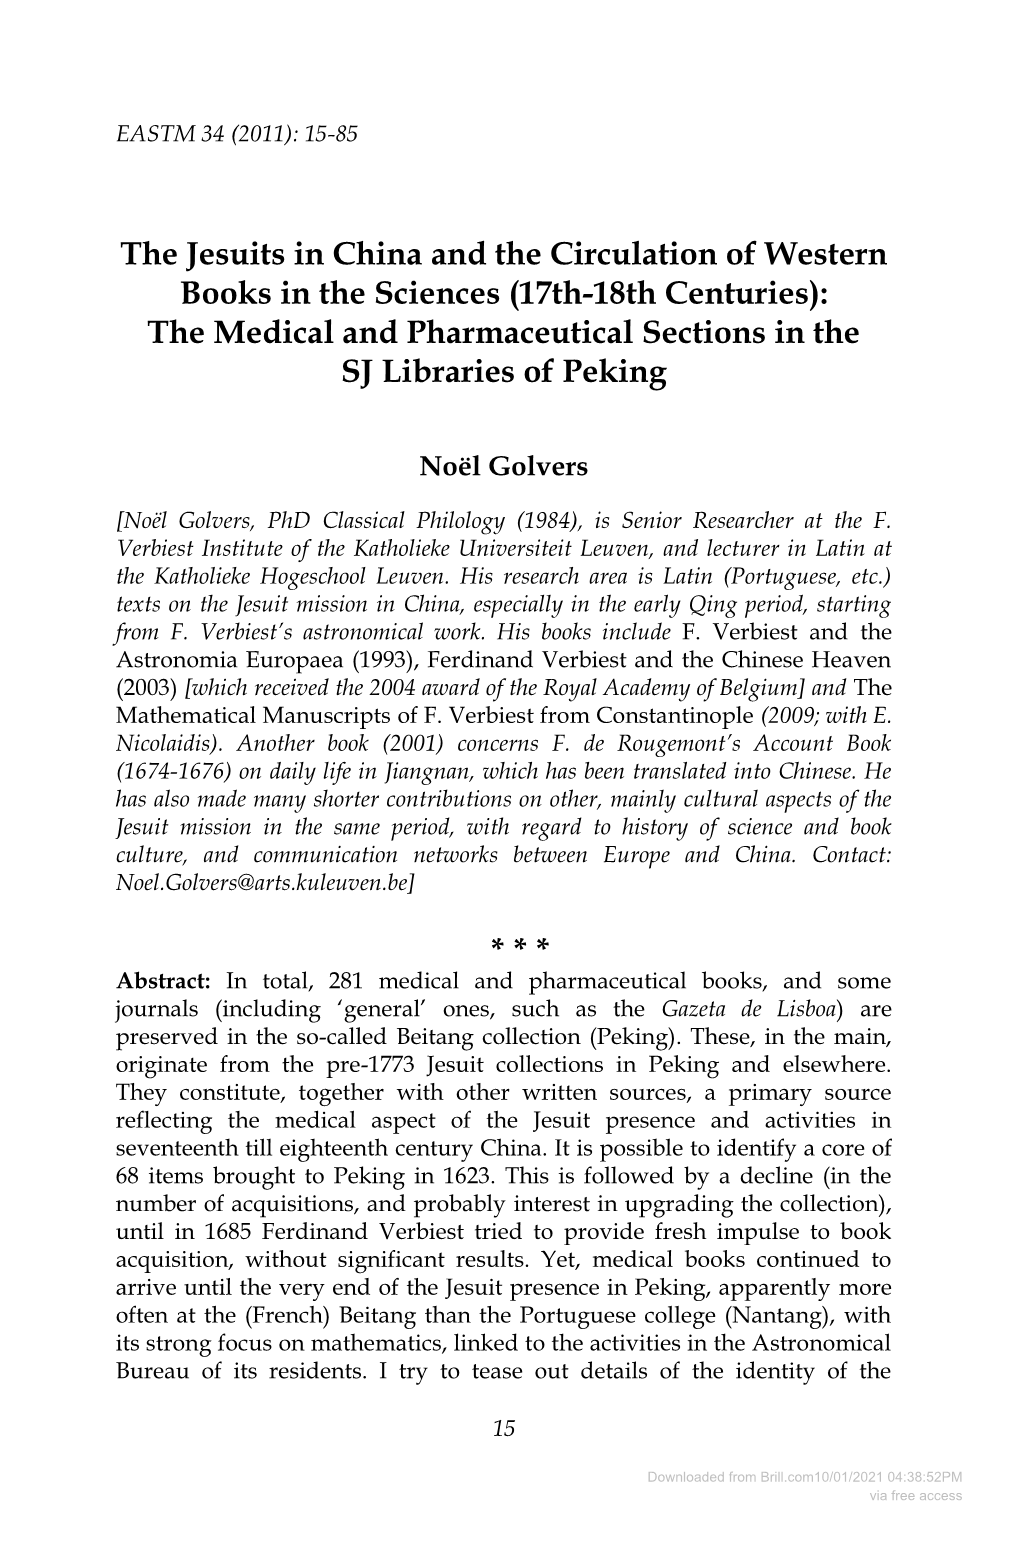 The Jesuits in China and the Circulation of Western Books in The